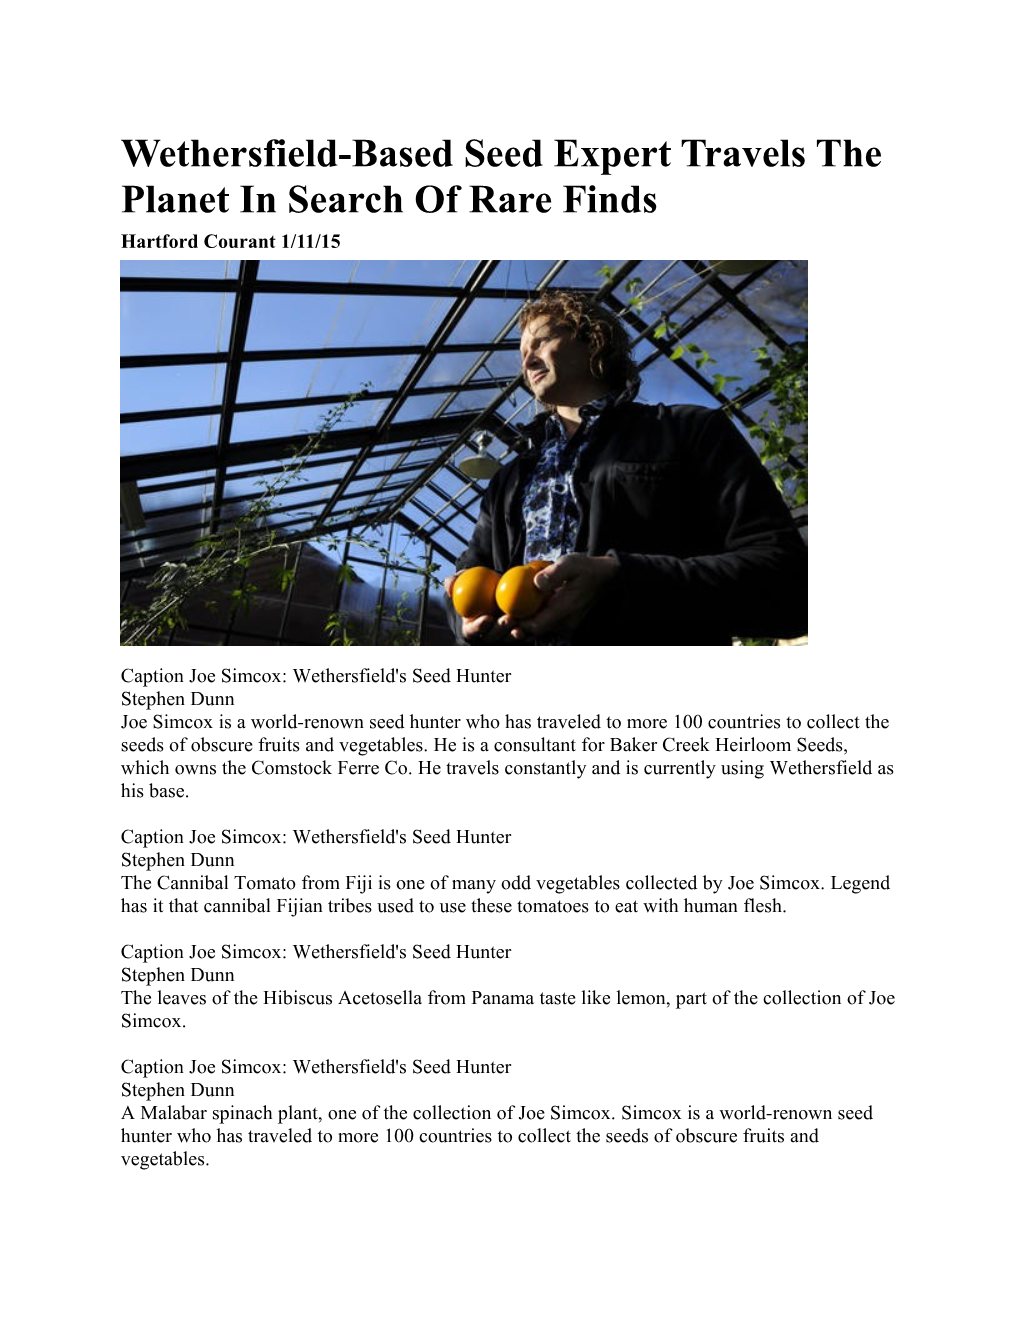 Wethersfield-Based Seed Expert Travels the Planet in Search of Rare Finds